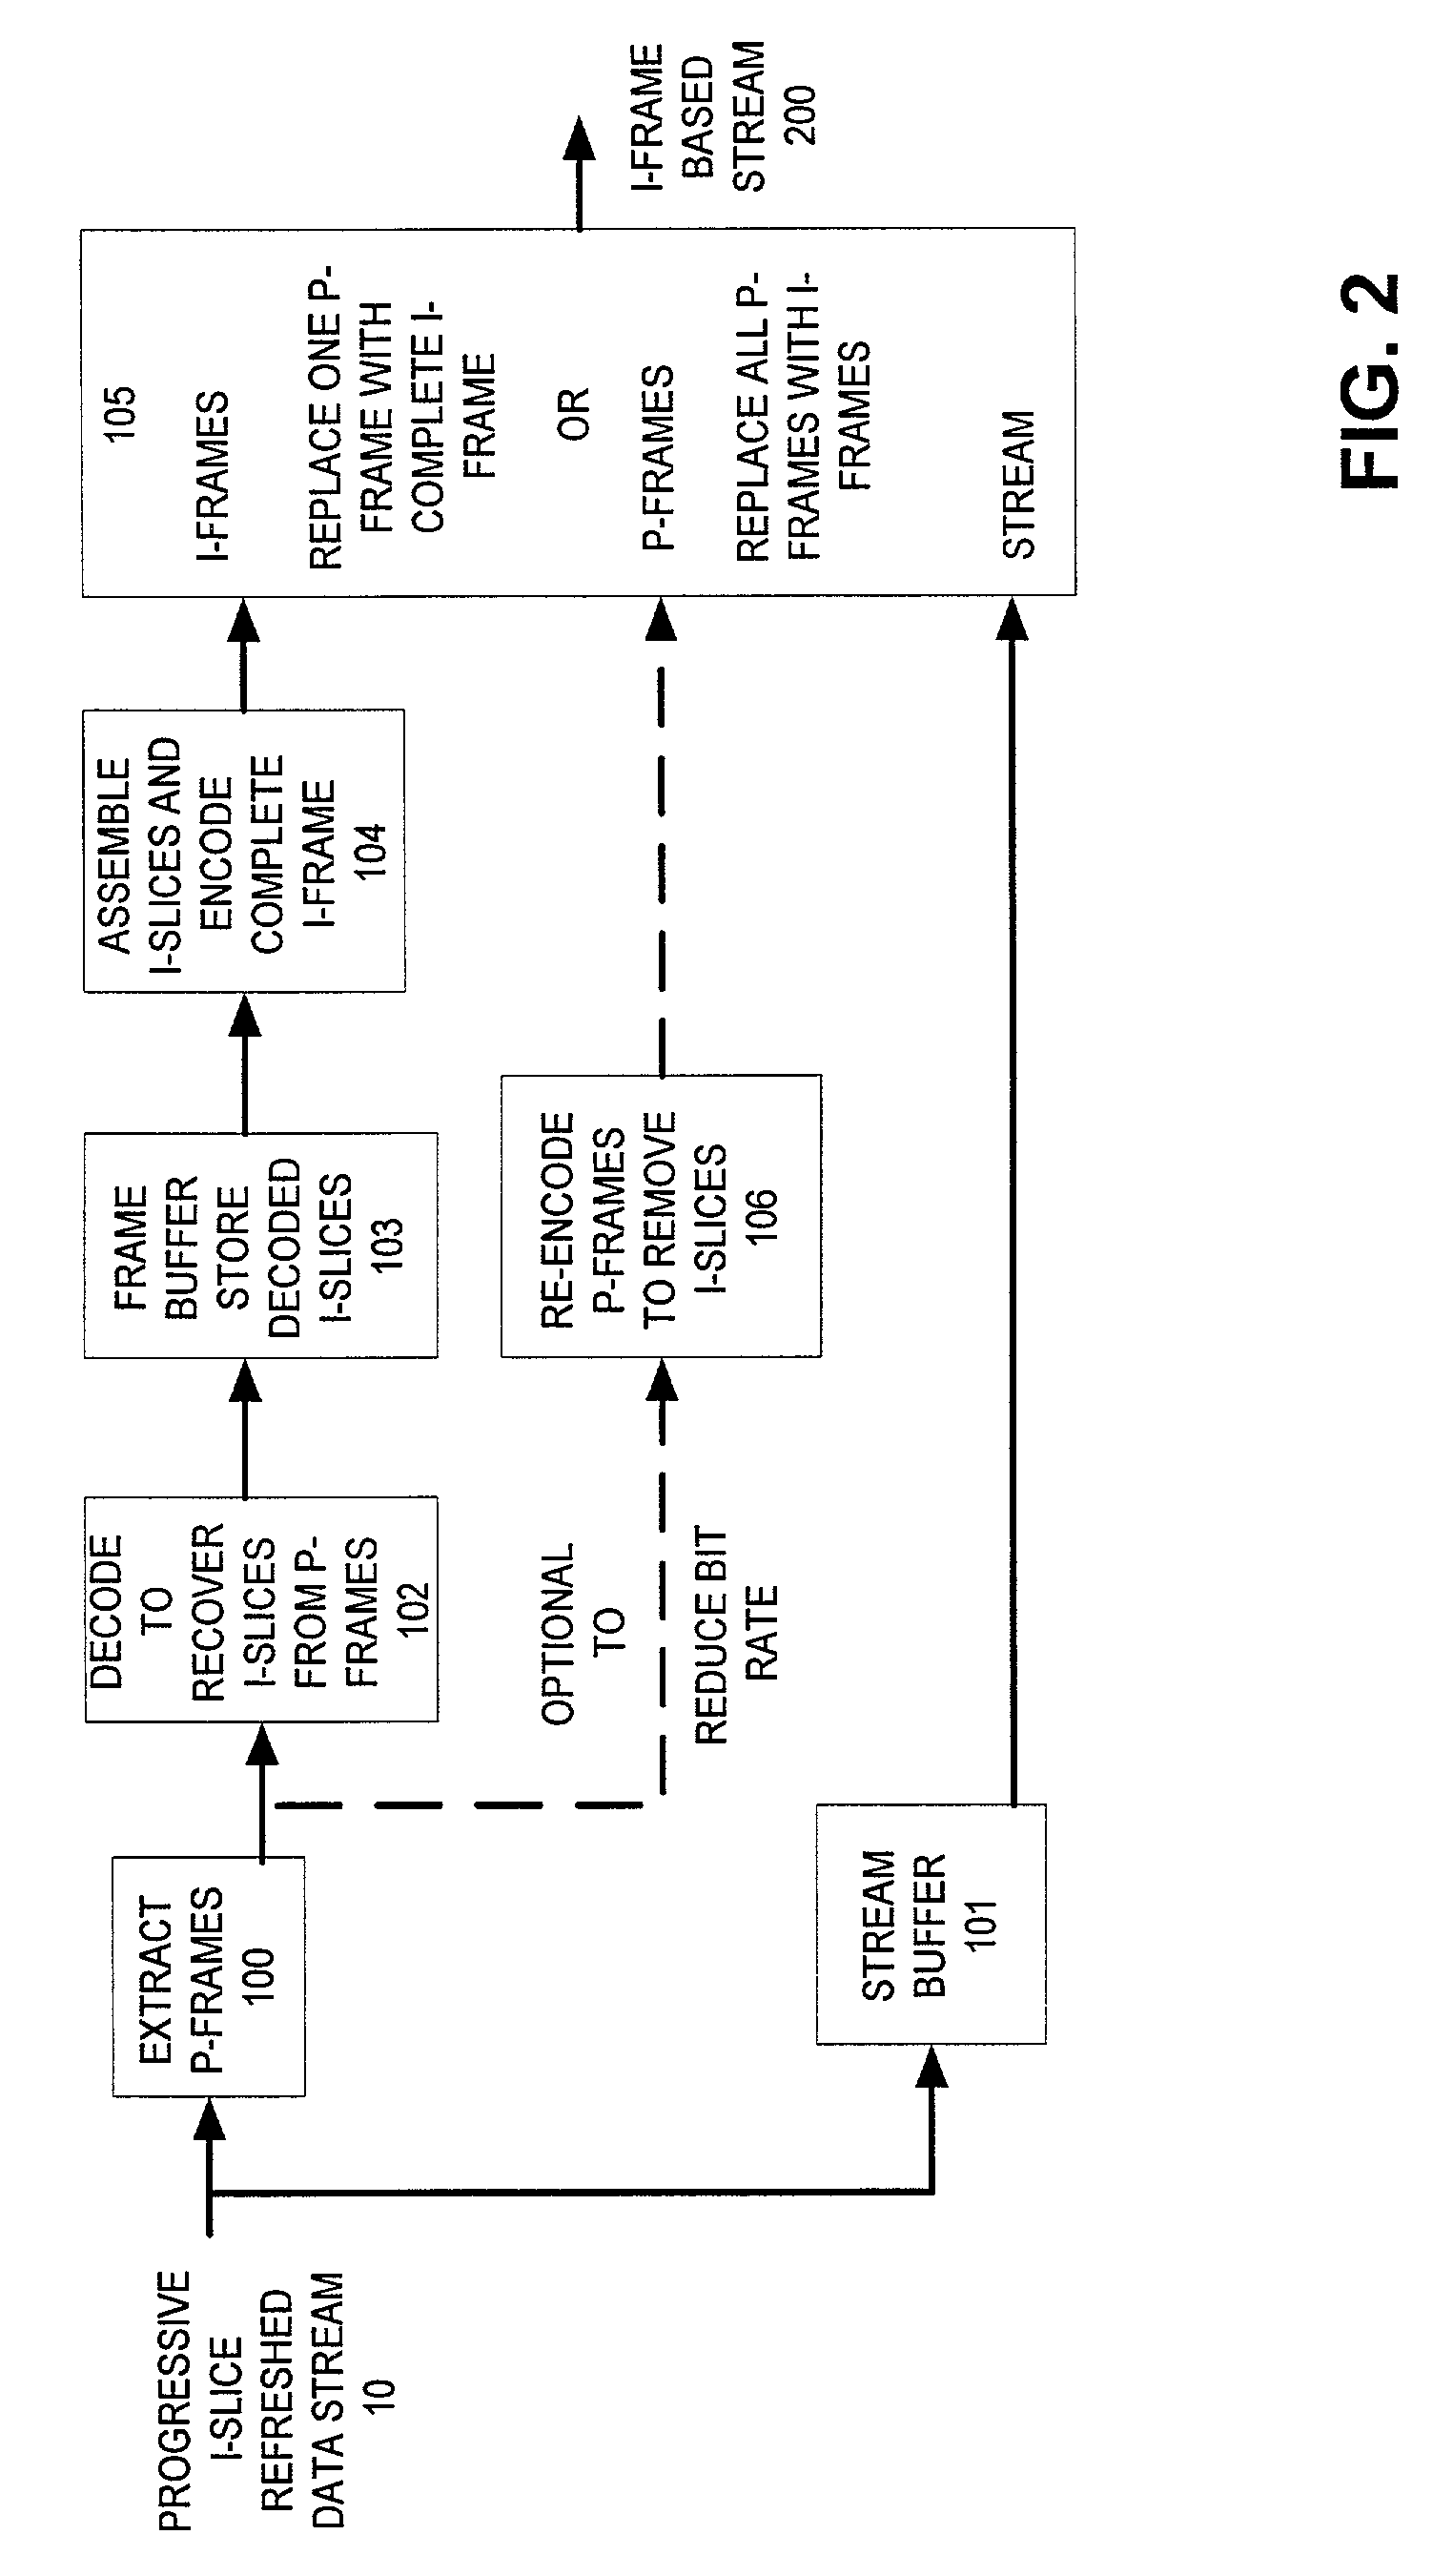 Methods and apparatus for transcoding progressive I-slice refreshed MPEG data streams to enable trick play mode features on a television appliance